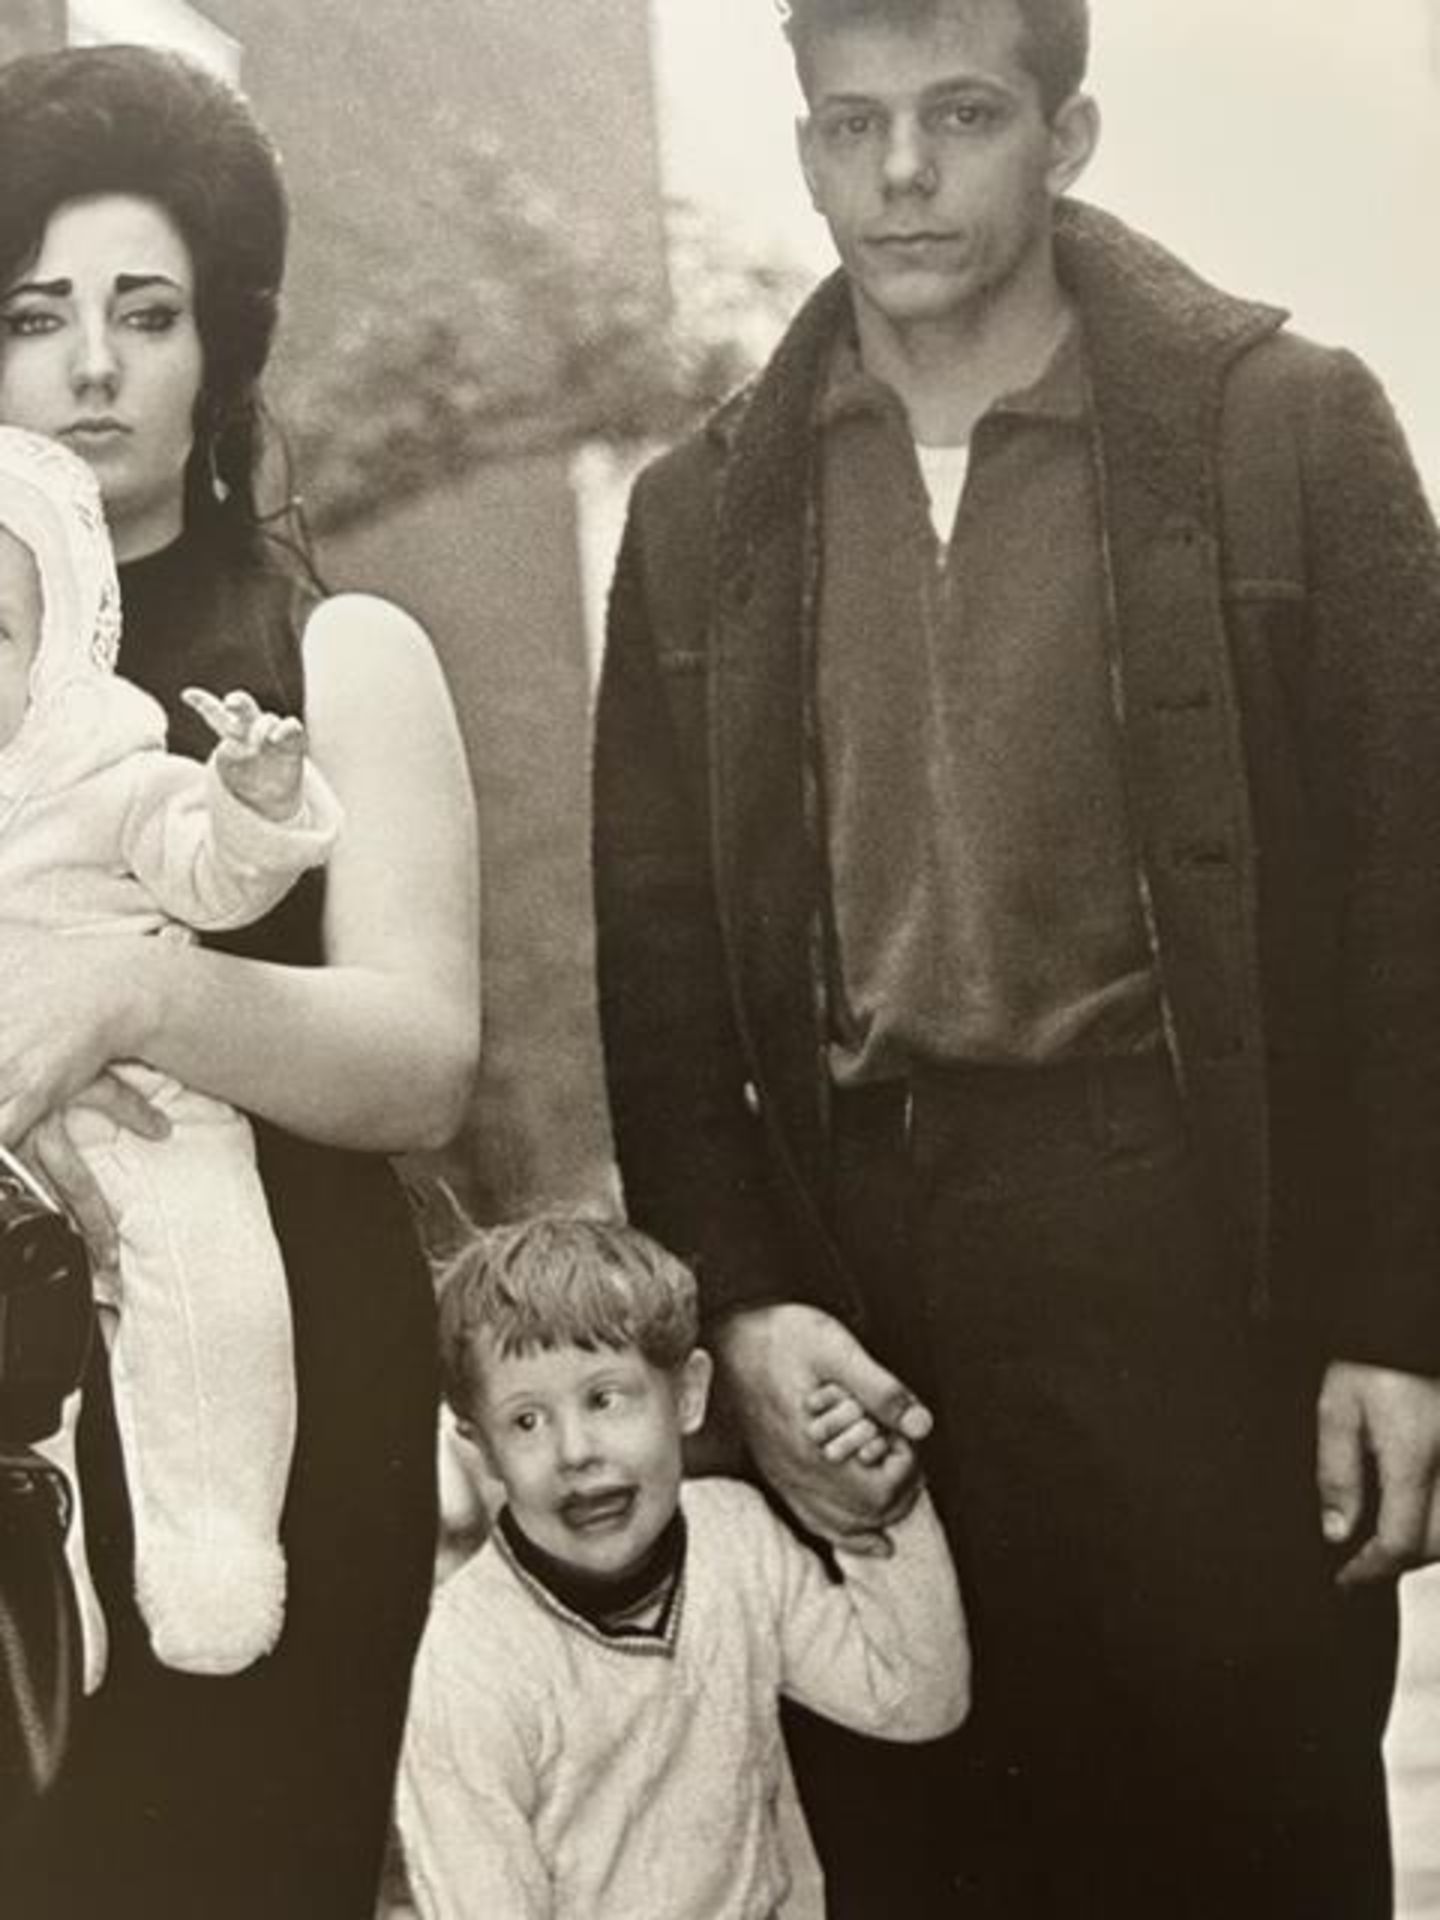 Diane Arbus "A young Brooklyn Family" Print. - Image 5 of 6